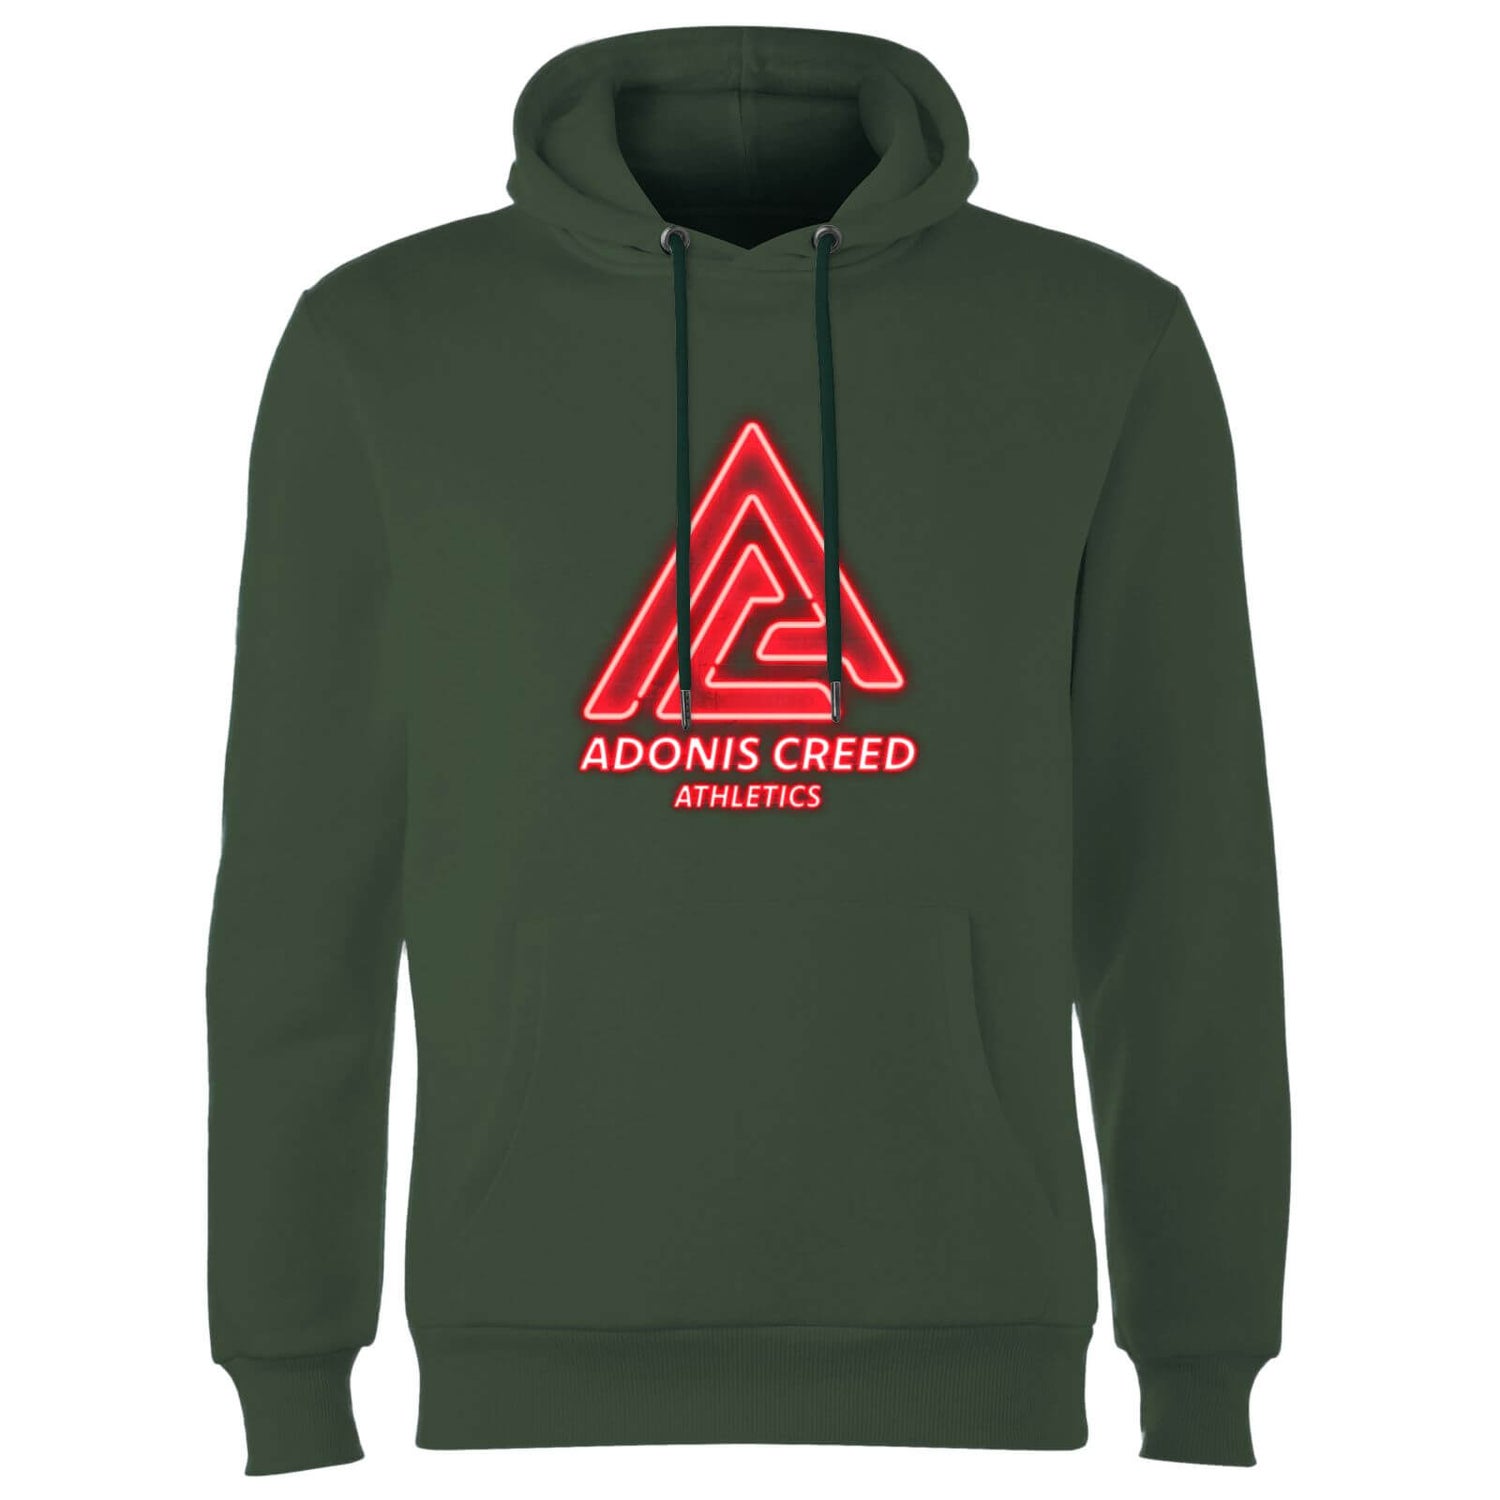 Creed Adonis Creed Athletics Neon Sign Hoodie - Green - S